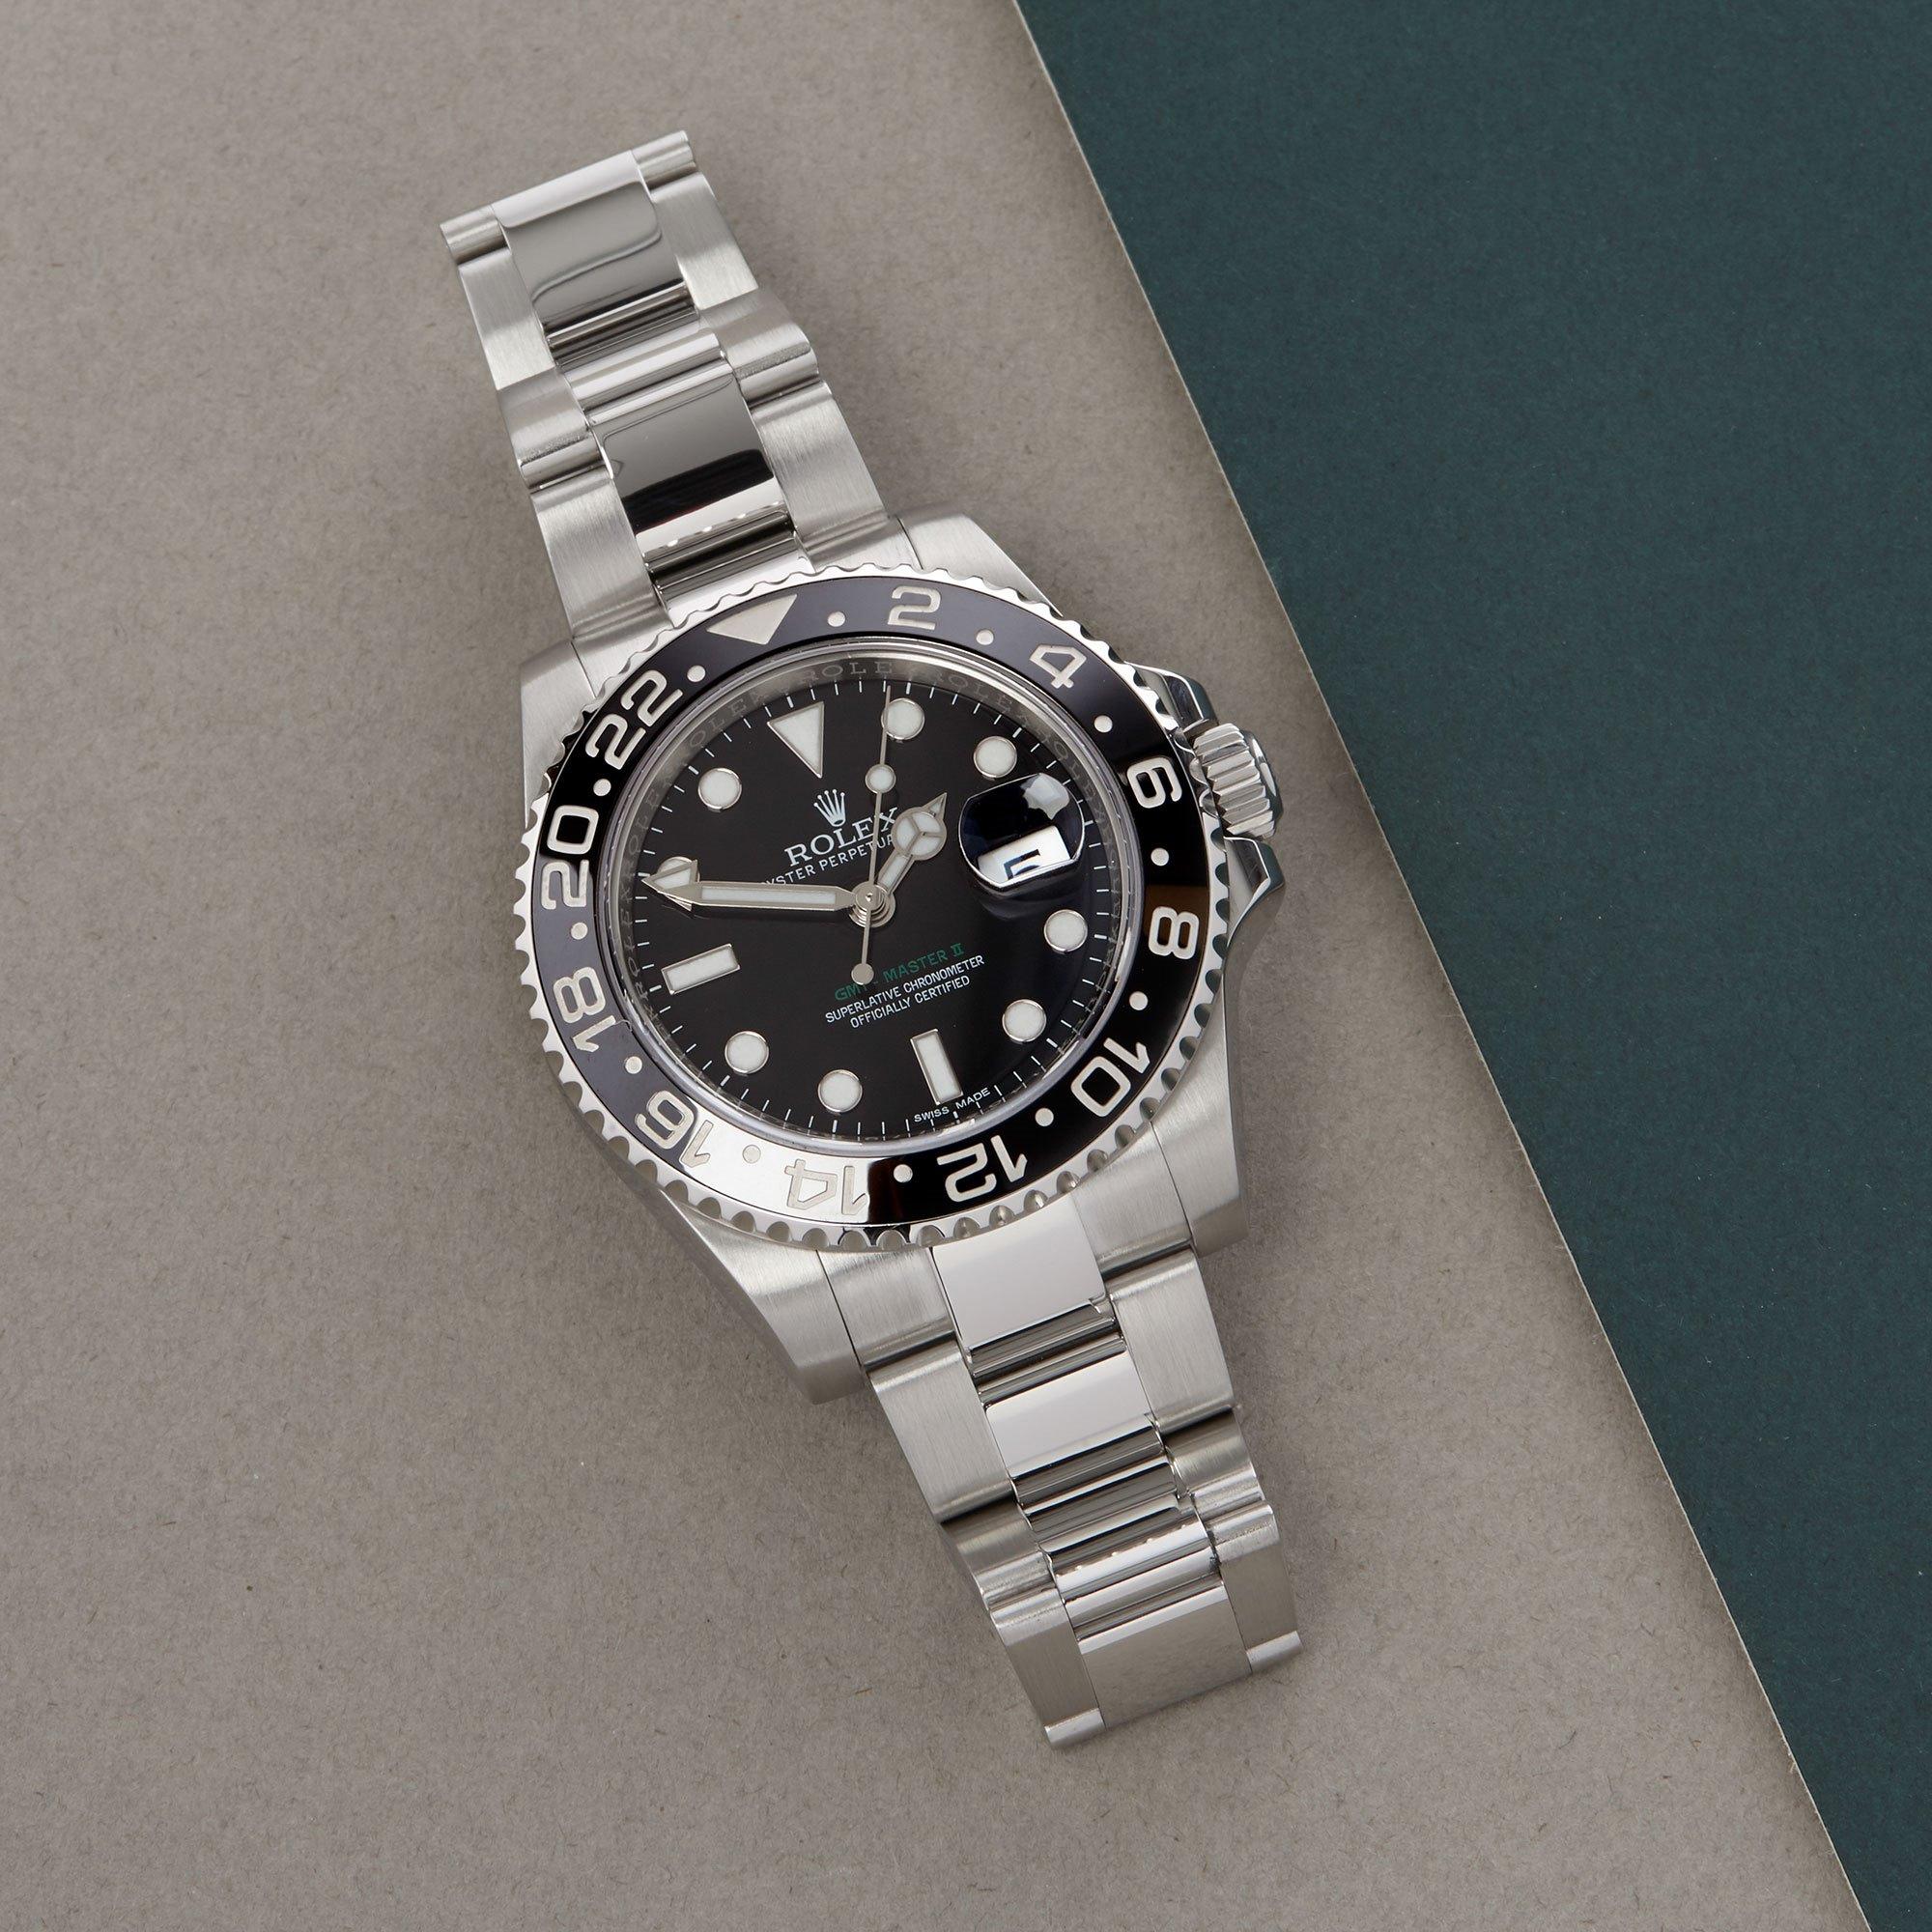 Xupes Reference: W007966
Manufacturer: Rolex
Model: GMT-Master II
Model Variant: 0
Model Number: 116710LN
Age: 13-02-2015
Gender: Men
Complete With: Rolex Box, Manuals, Guarantee, Hand Tag, Card Holder & Guarantee Card 
Dial: Black Baton
Glass: